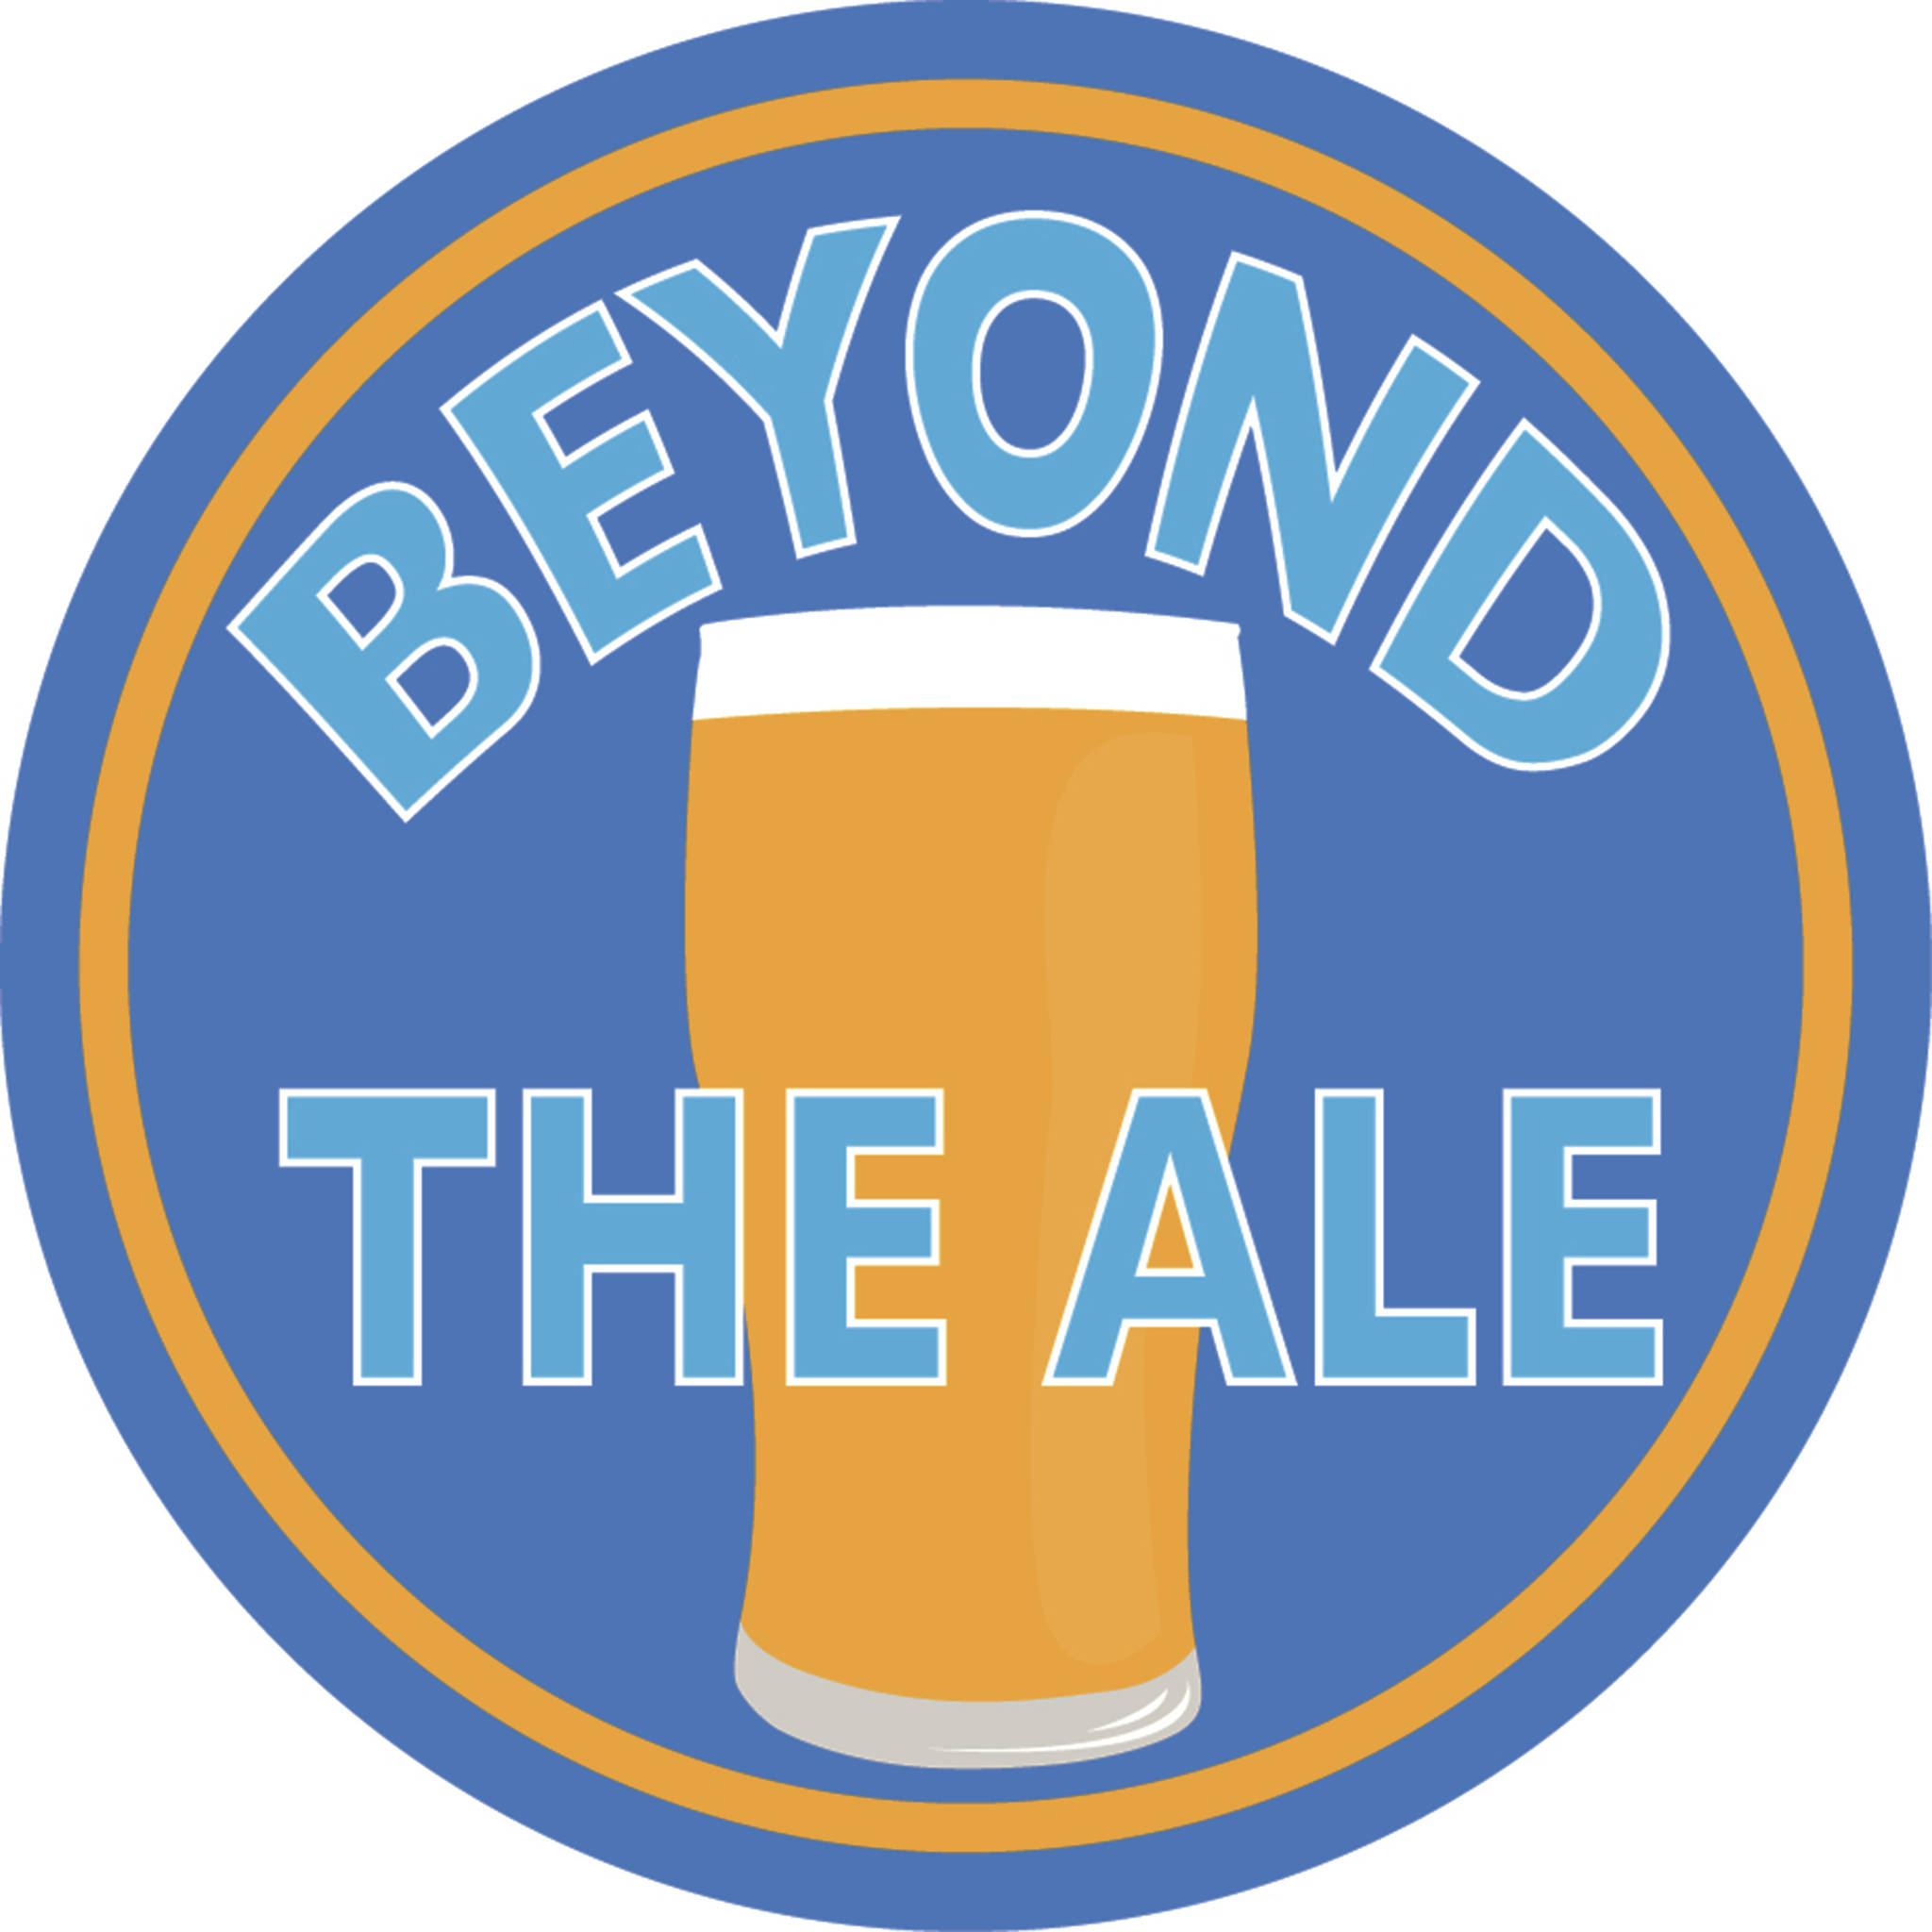 A complementary pair: Beyond The Ale visits Red Spruce